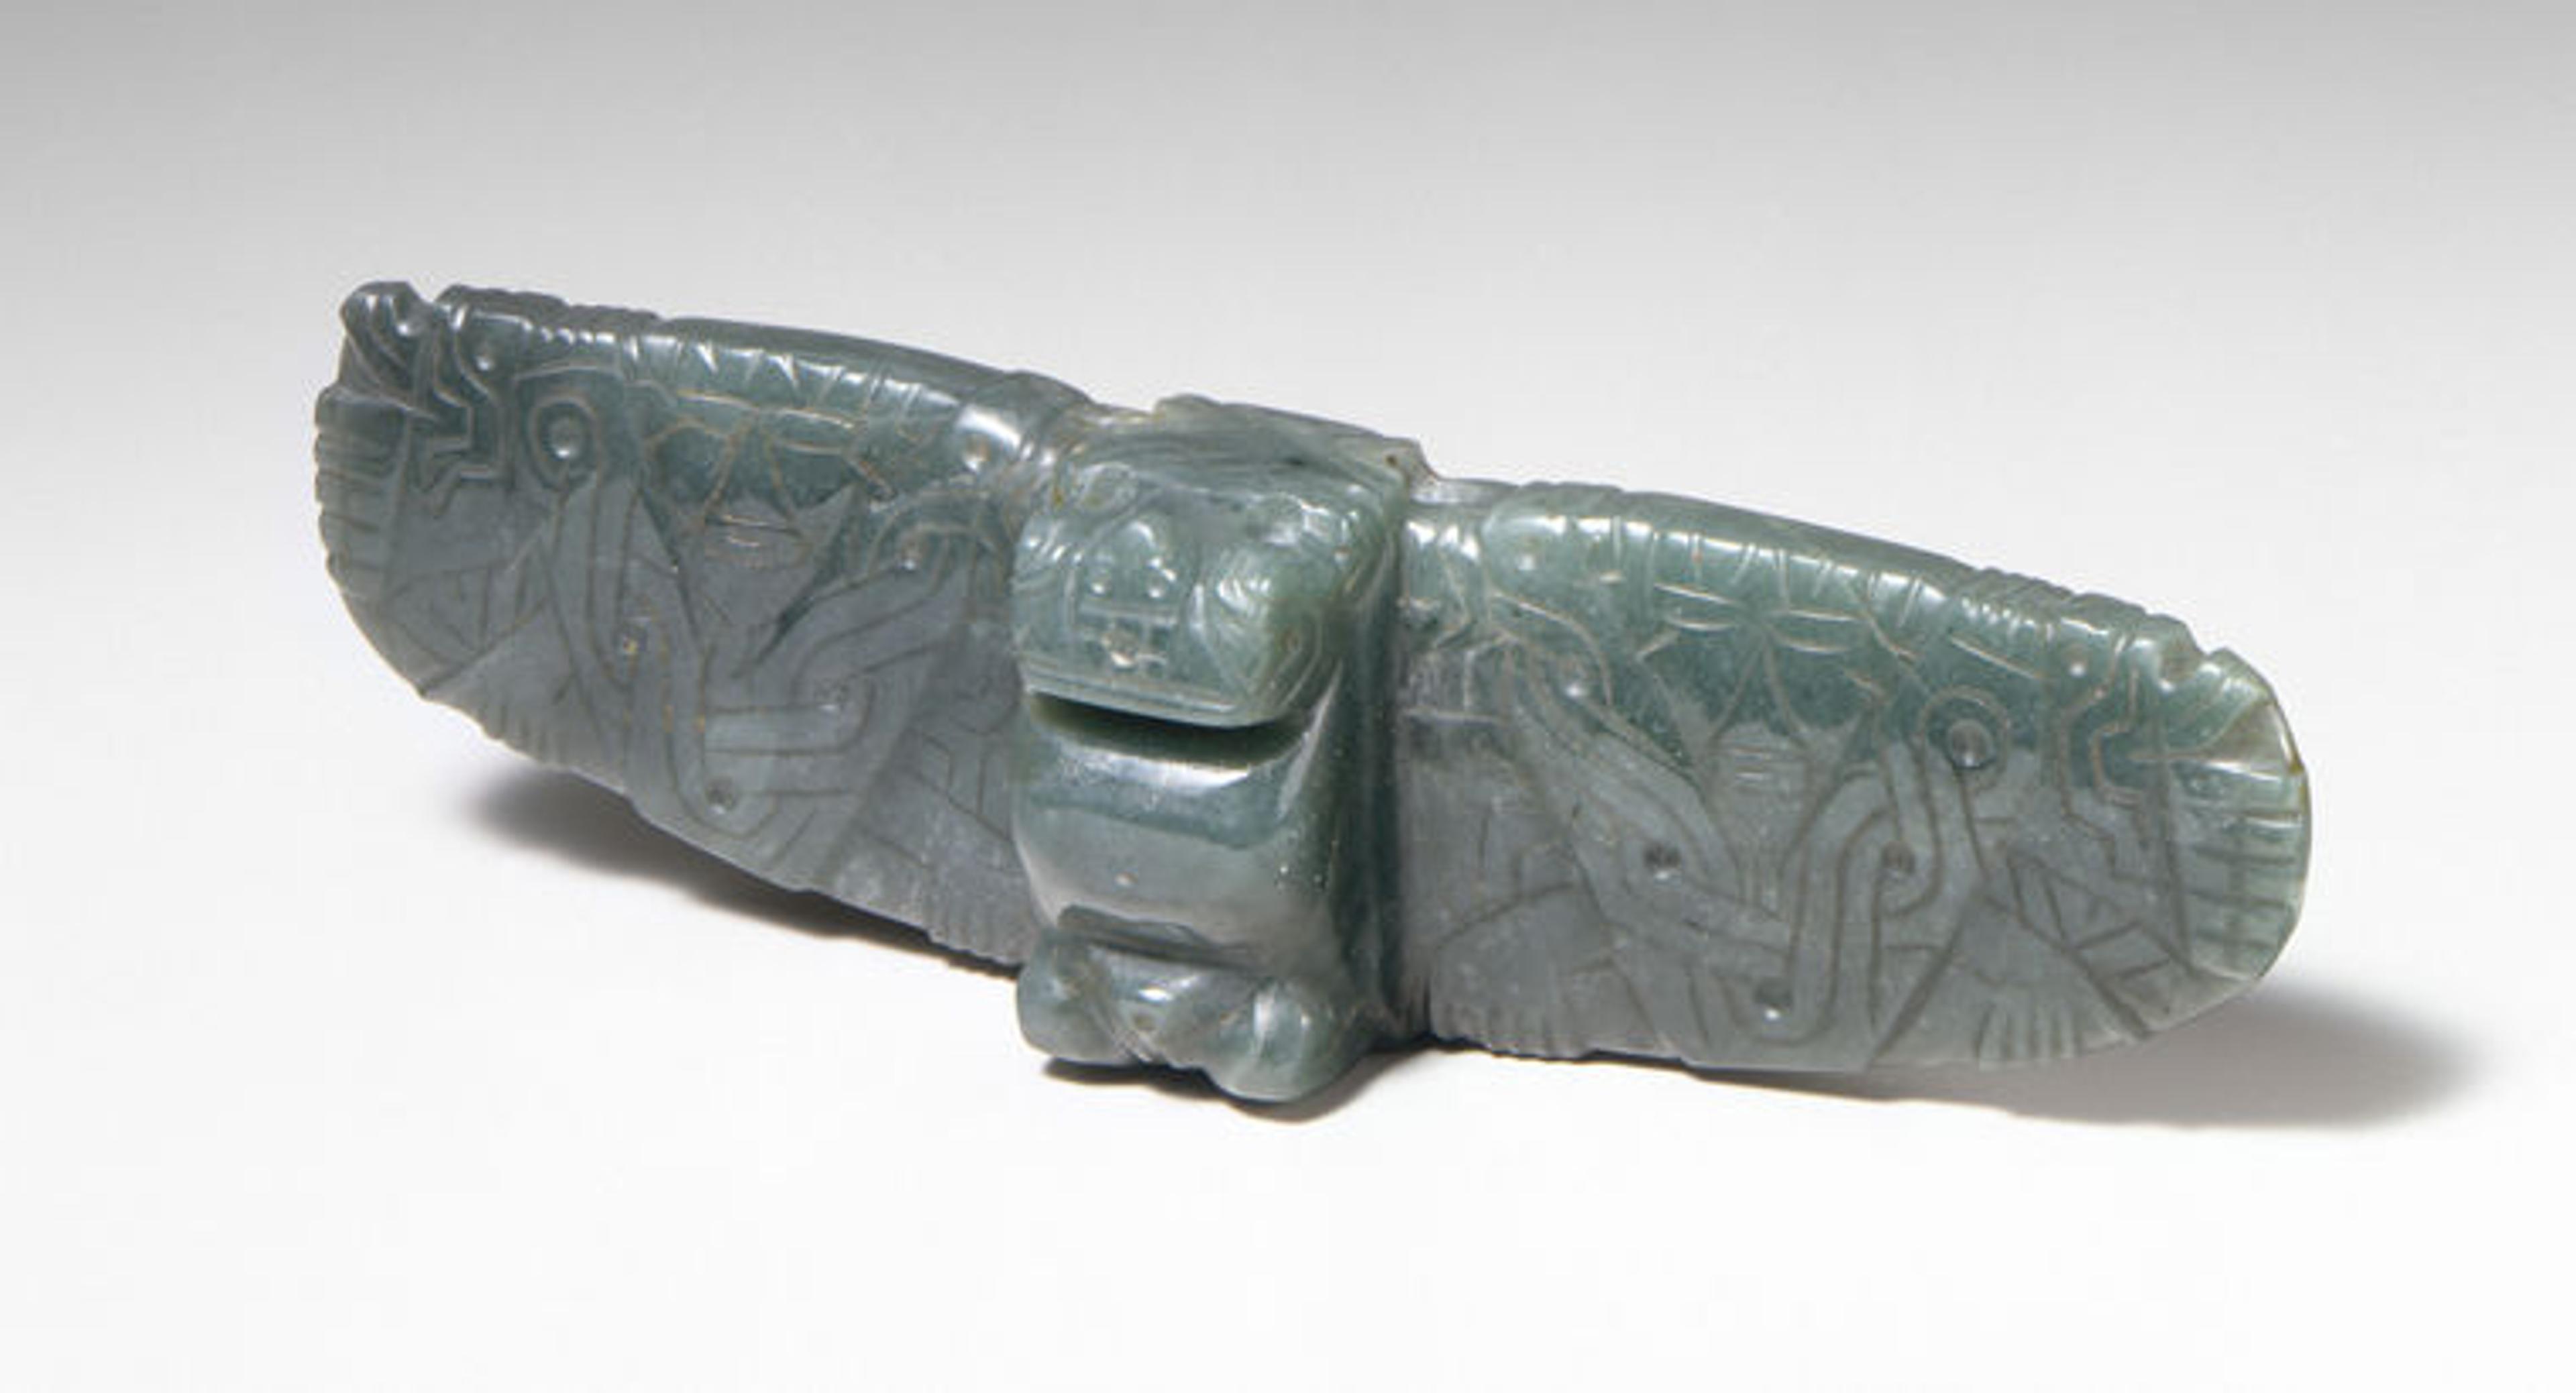 A jadeite pendant from the ancient Americas in the form of a bat